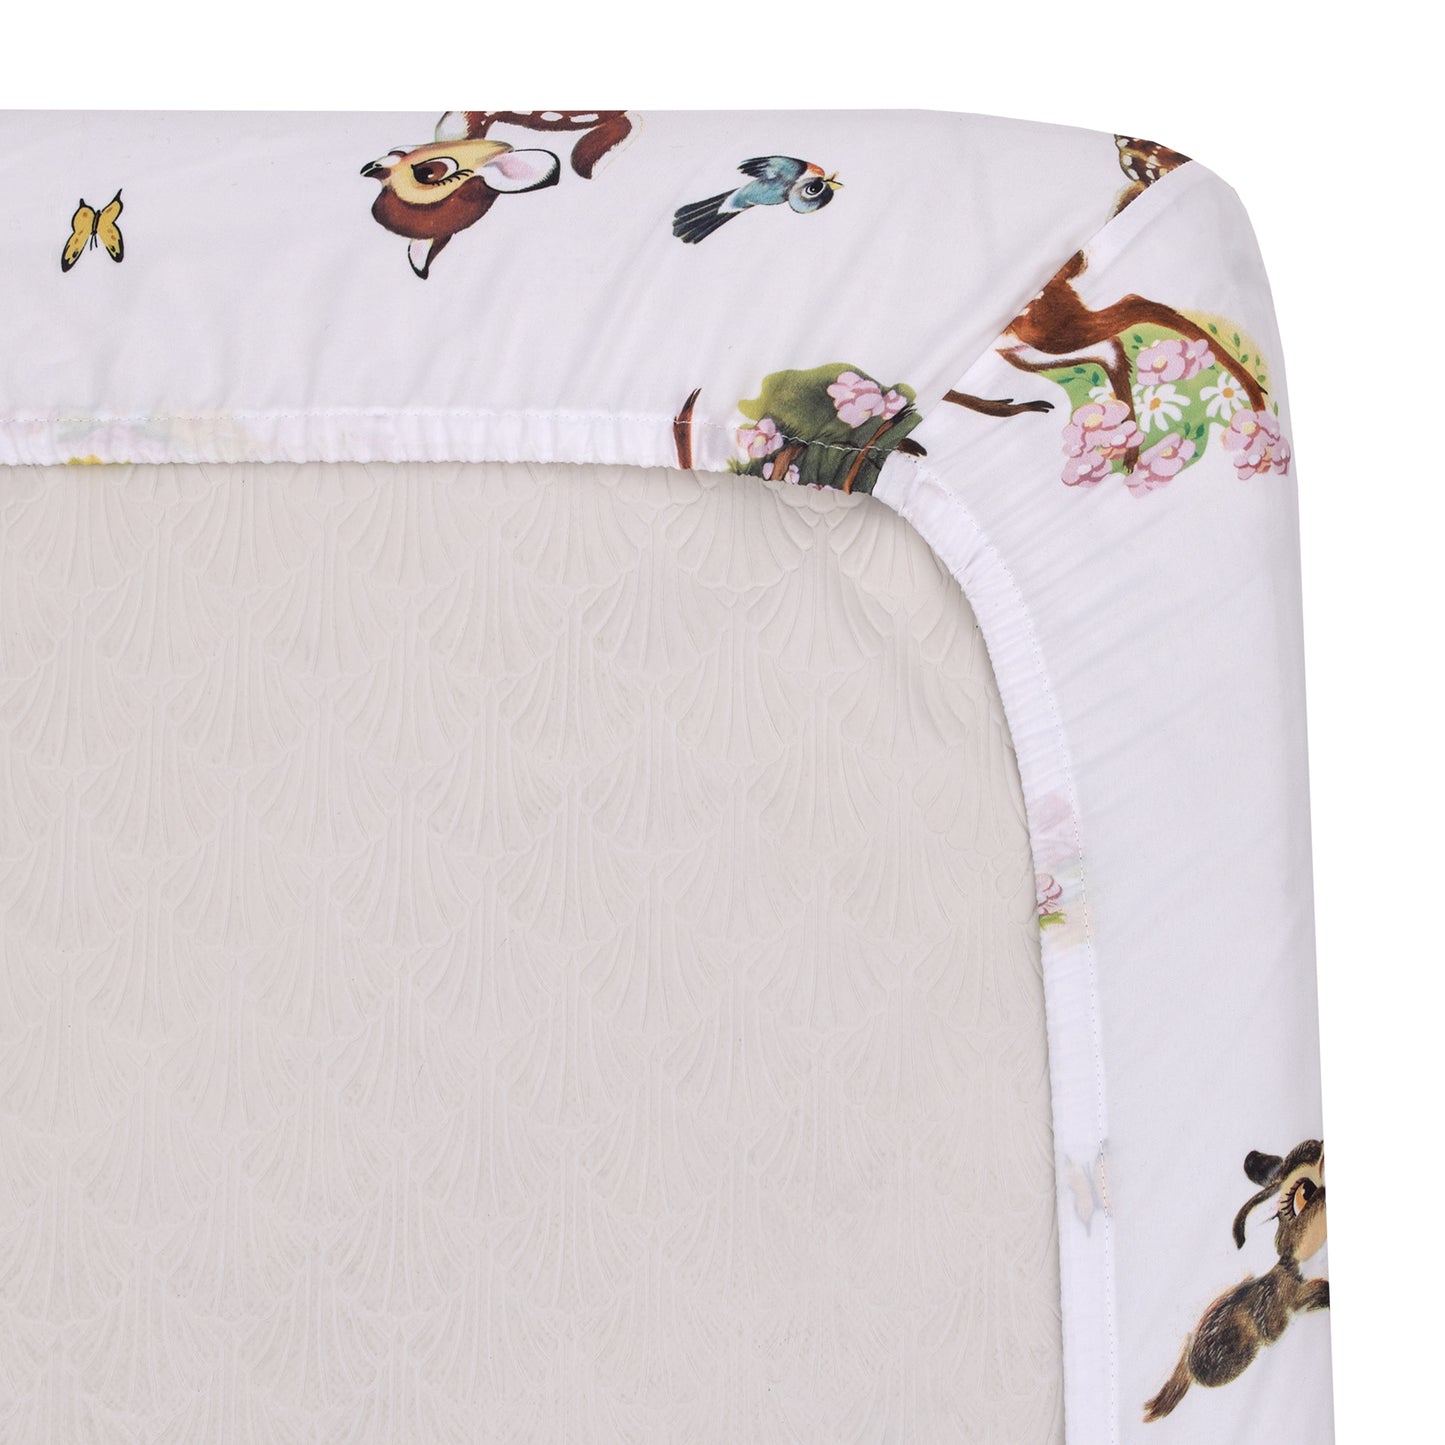 Disney Vintage Bambi - Tan, Green and White, Bambi and Thumper Floral Nursery Fitted Mini Crib Sheet